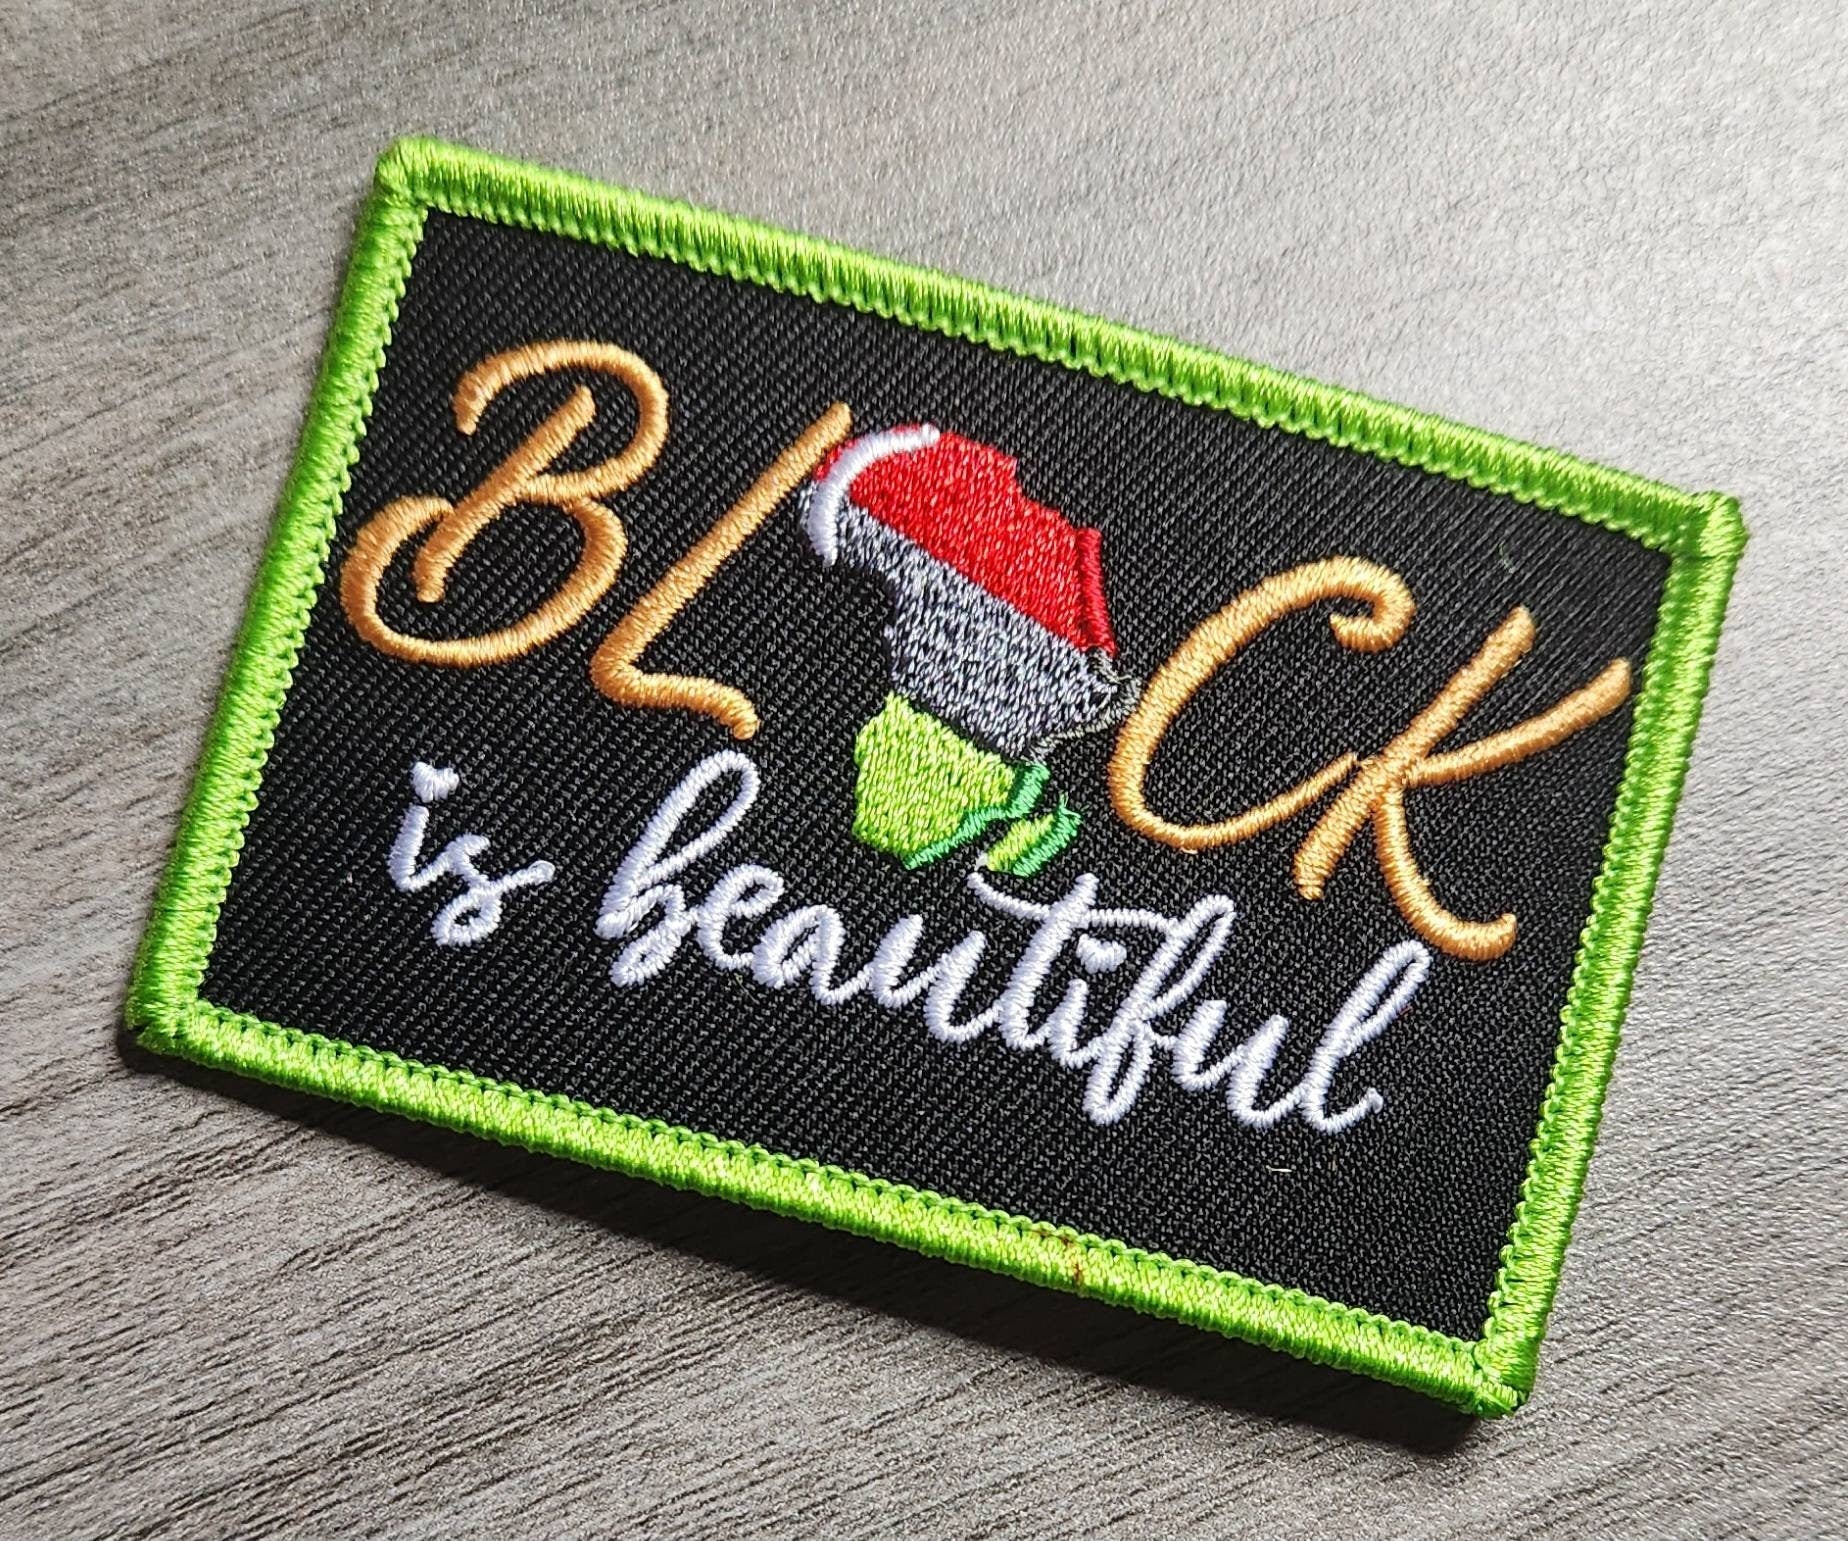 New, "Black is Beautiful" w/Color Flag, Iron-On Embroidered Afrocentric Patch; Black History Month Patch, Applique for Clothing, Hats, Crocs